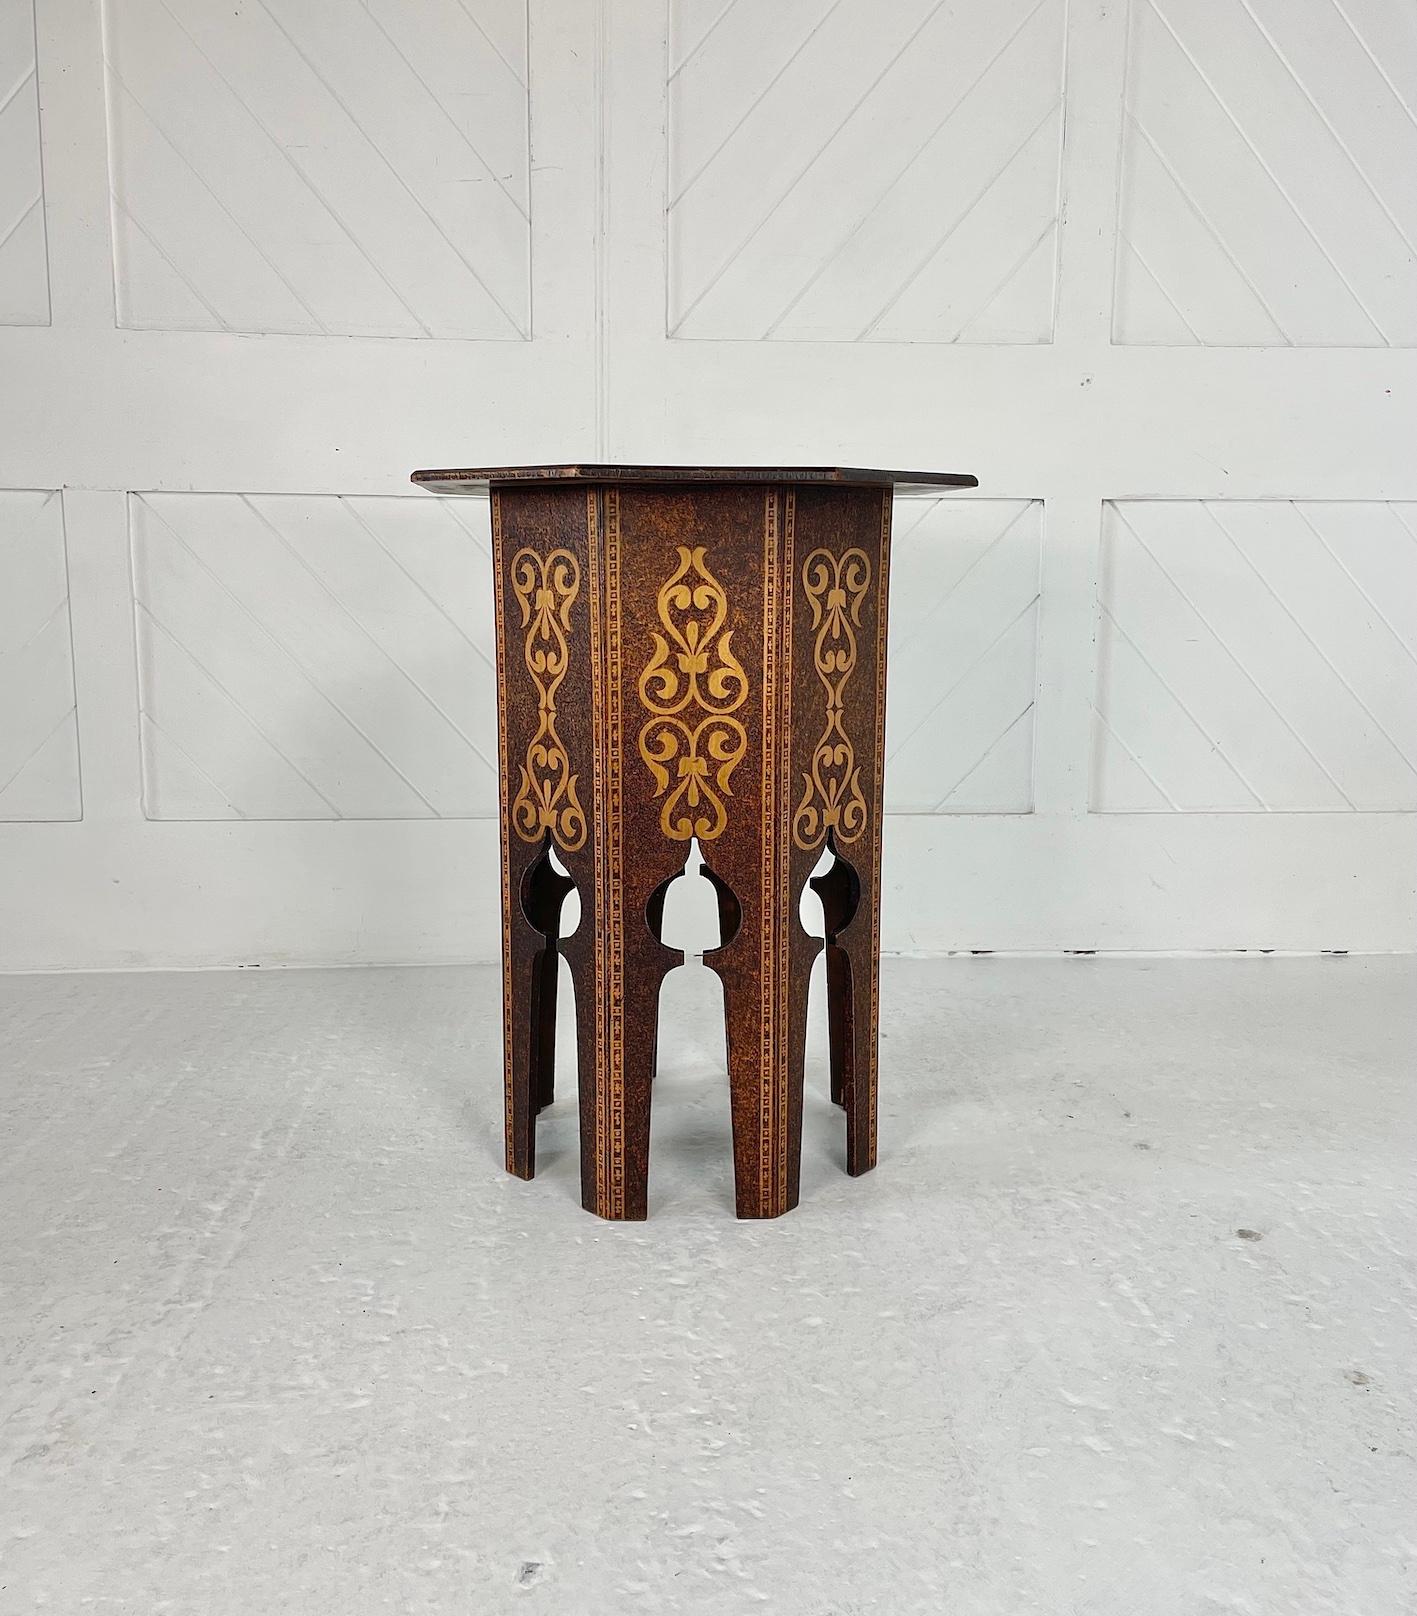 An Arts & Crafts poker work table designed in the Moresque style with cut out arched legs and decorative motifs to the top and side panel.
There is the remnants of a Scottish label underneath.
Circa 1900
Pokerwork is the art of decorating wood or